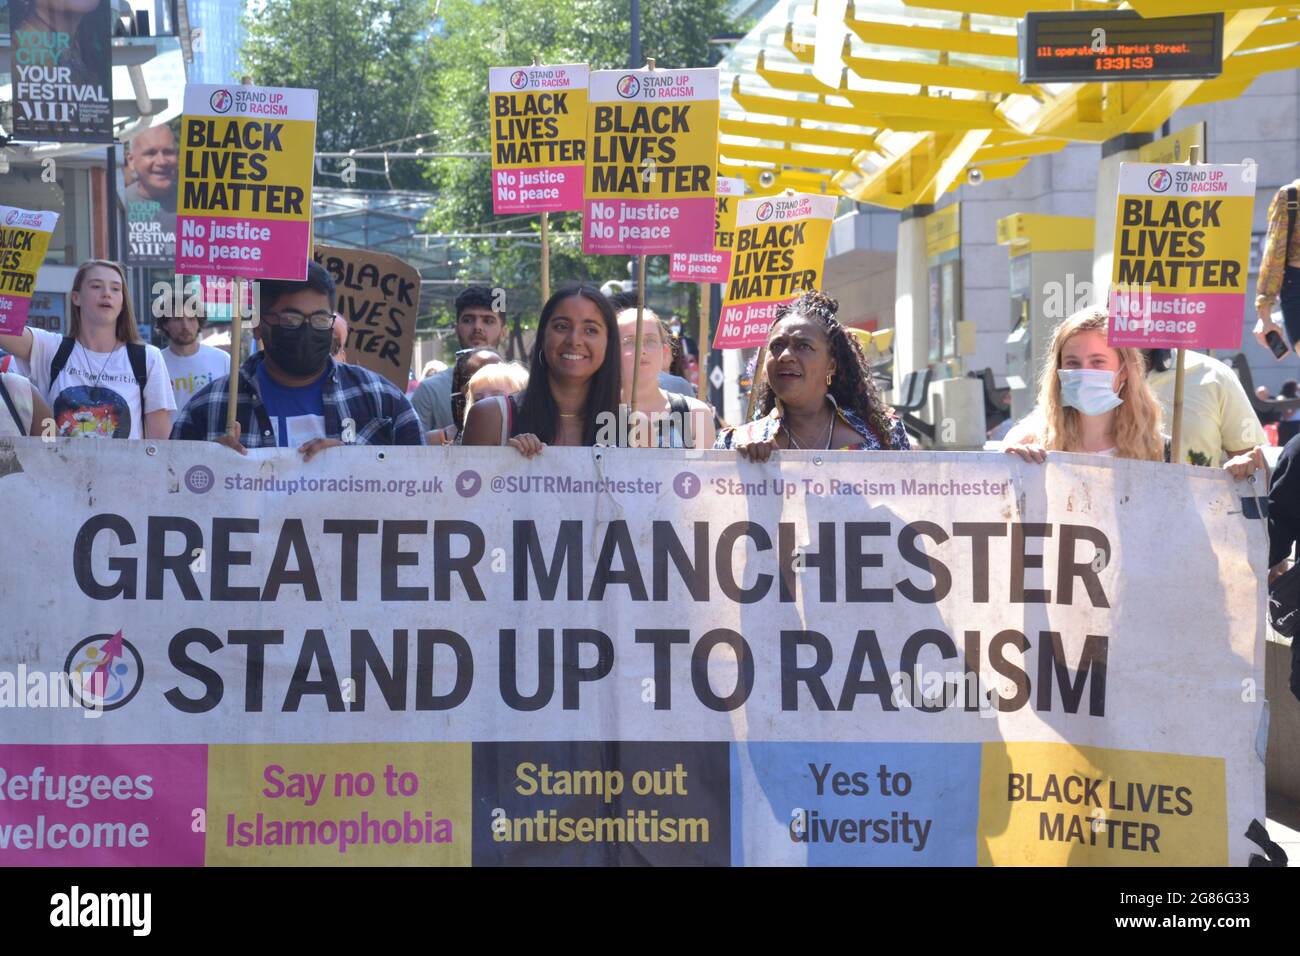 Manchester, UK.  17th July 2021. A lively and vocal Black Lives Matter protest of some 120 people marched from St Peter's Square to the Football Museum in central Manchester. This follows the online racist abuse of black footballers in the England football team, with the protest having a theme of solidarity with England football players: Marcus Rashford, Bukayo Saka and Jadon Sancho. The group took the knee in the road by the Football Museum, blocking the traffic for 20 minutes. Credit: Terry Waller/Alamy Live News Stock Photo